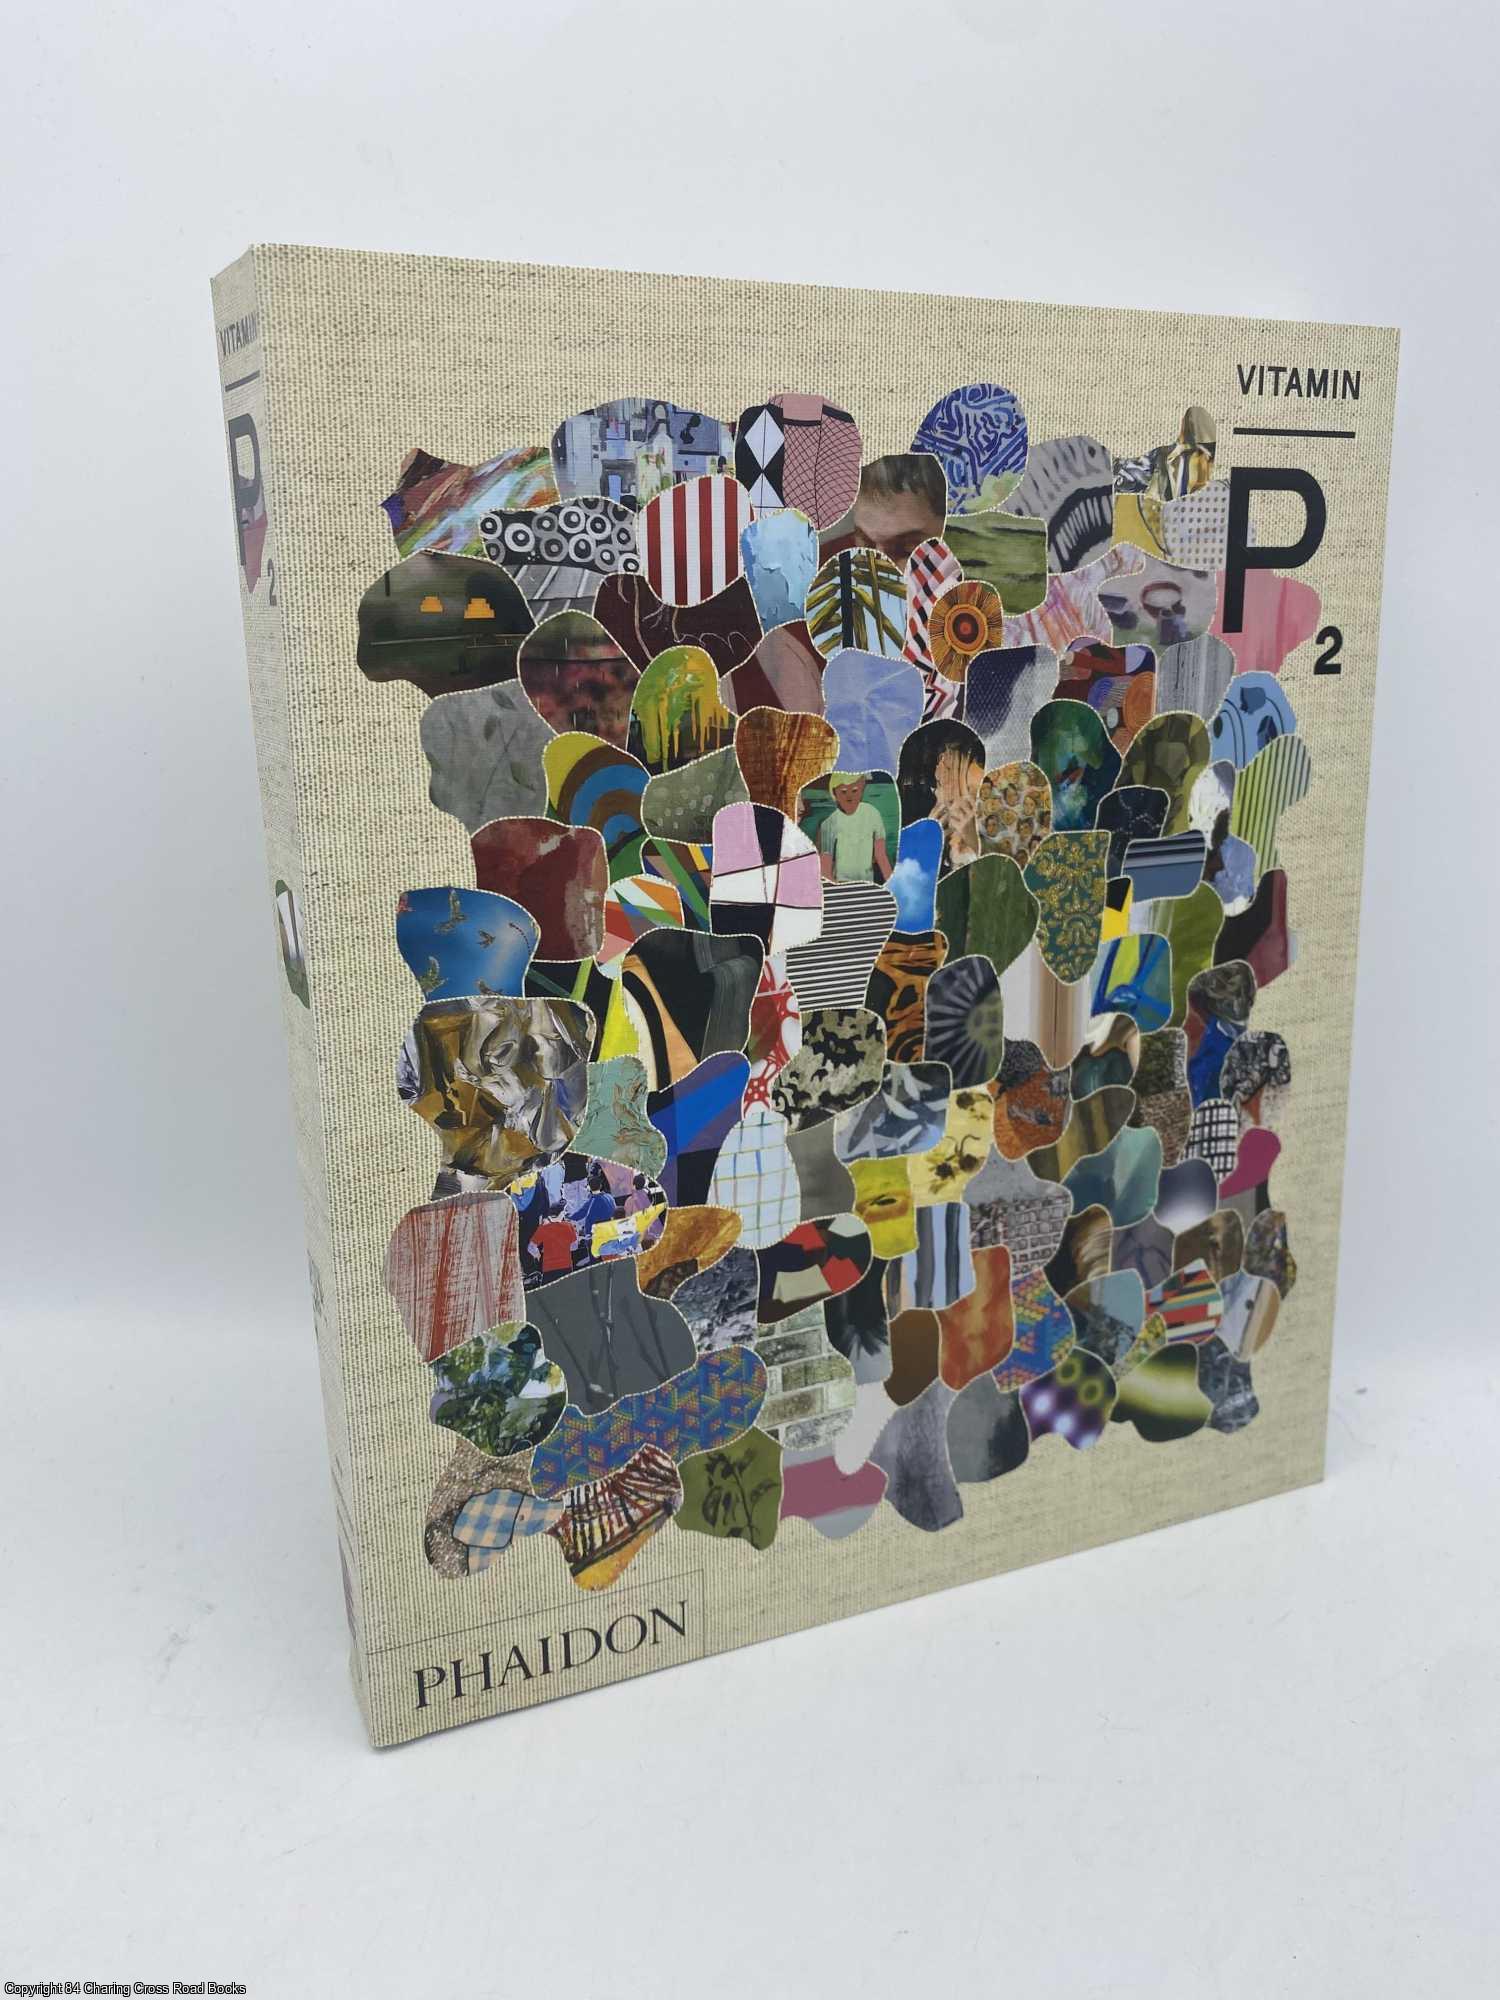 Vitamin P2 New Perspectives in Painting by Barry Schwabsky on 84 Charing  Cross Rare Books